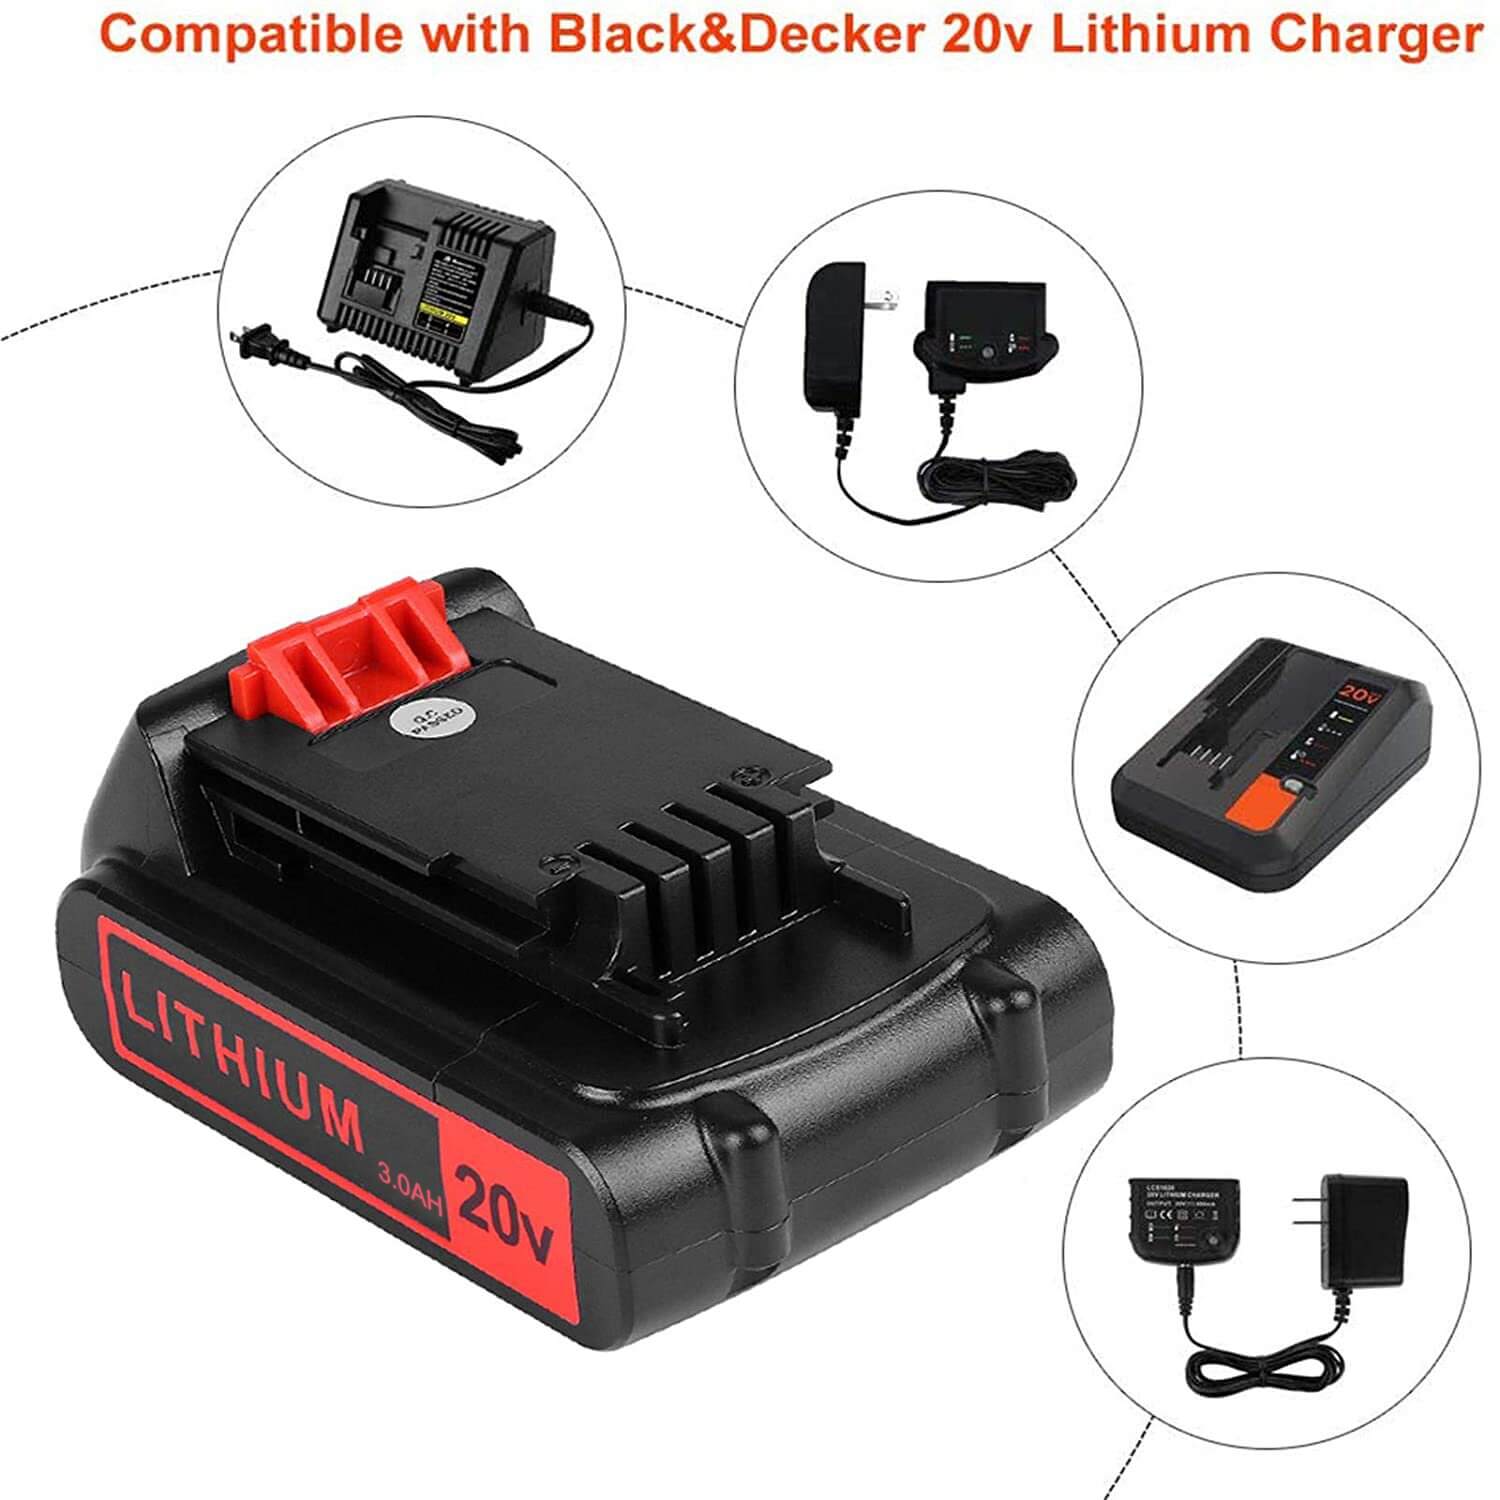 2 Pack For Black and Decker 20V Battery Replacement | LBXR20 3.0Ah Li-ion Battery